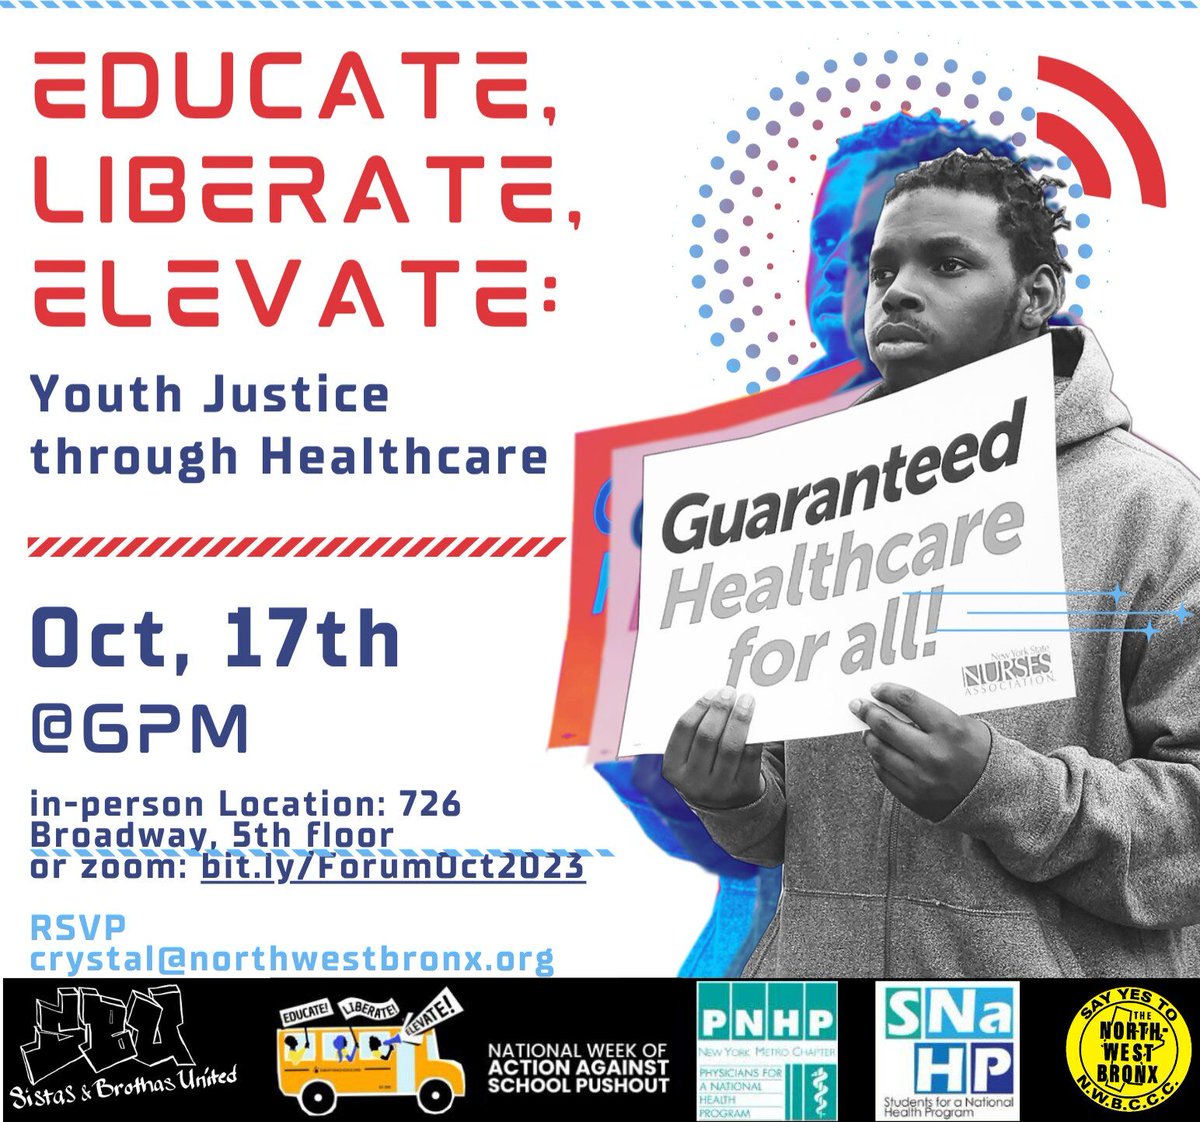 Grantee partner @SBU_POWER  is co-hosting an event at @DignityinSchool 2023 National Week of Action! Join tonight to discuss the connections between access to healthcare & youth educational outcomes.

Register here: 
bit.ly/3M2nLp0 

#DSCWoA2023 #EducateLiberateElevate